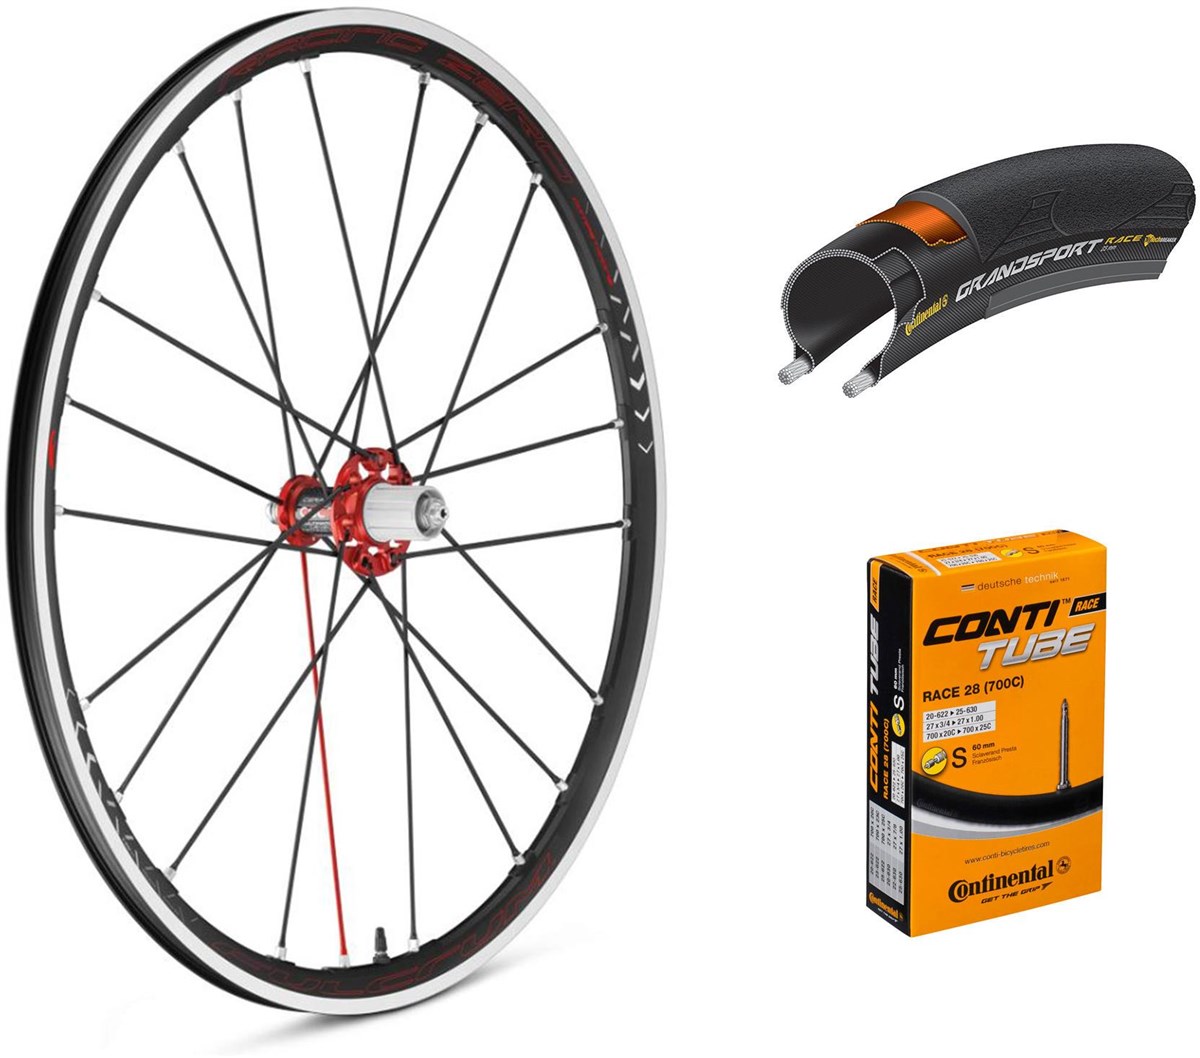 Fulcrum Racing Zero Competizione 700c Wheelset with Tyres and Tubes product image